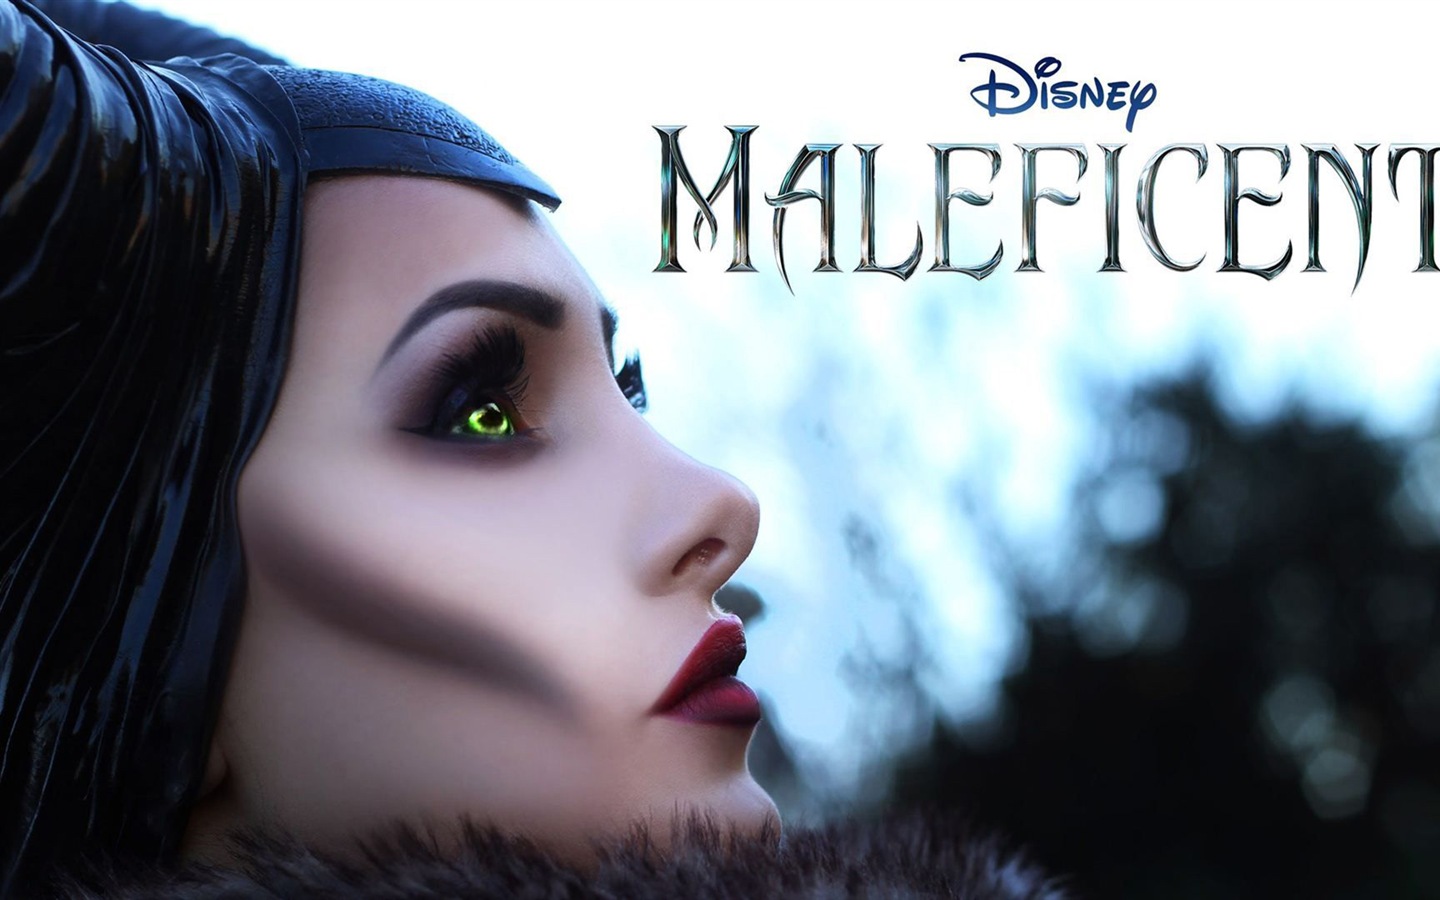 Maleficent 2014 HD movie wallpapers #10 - 1440x900